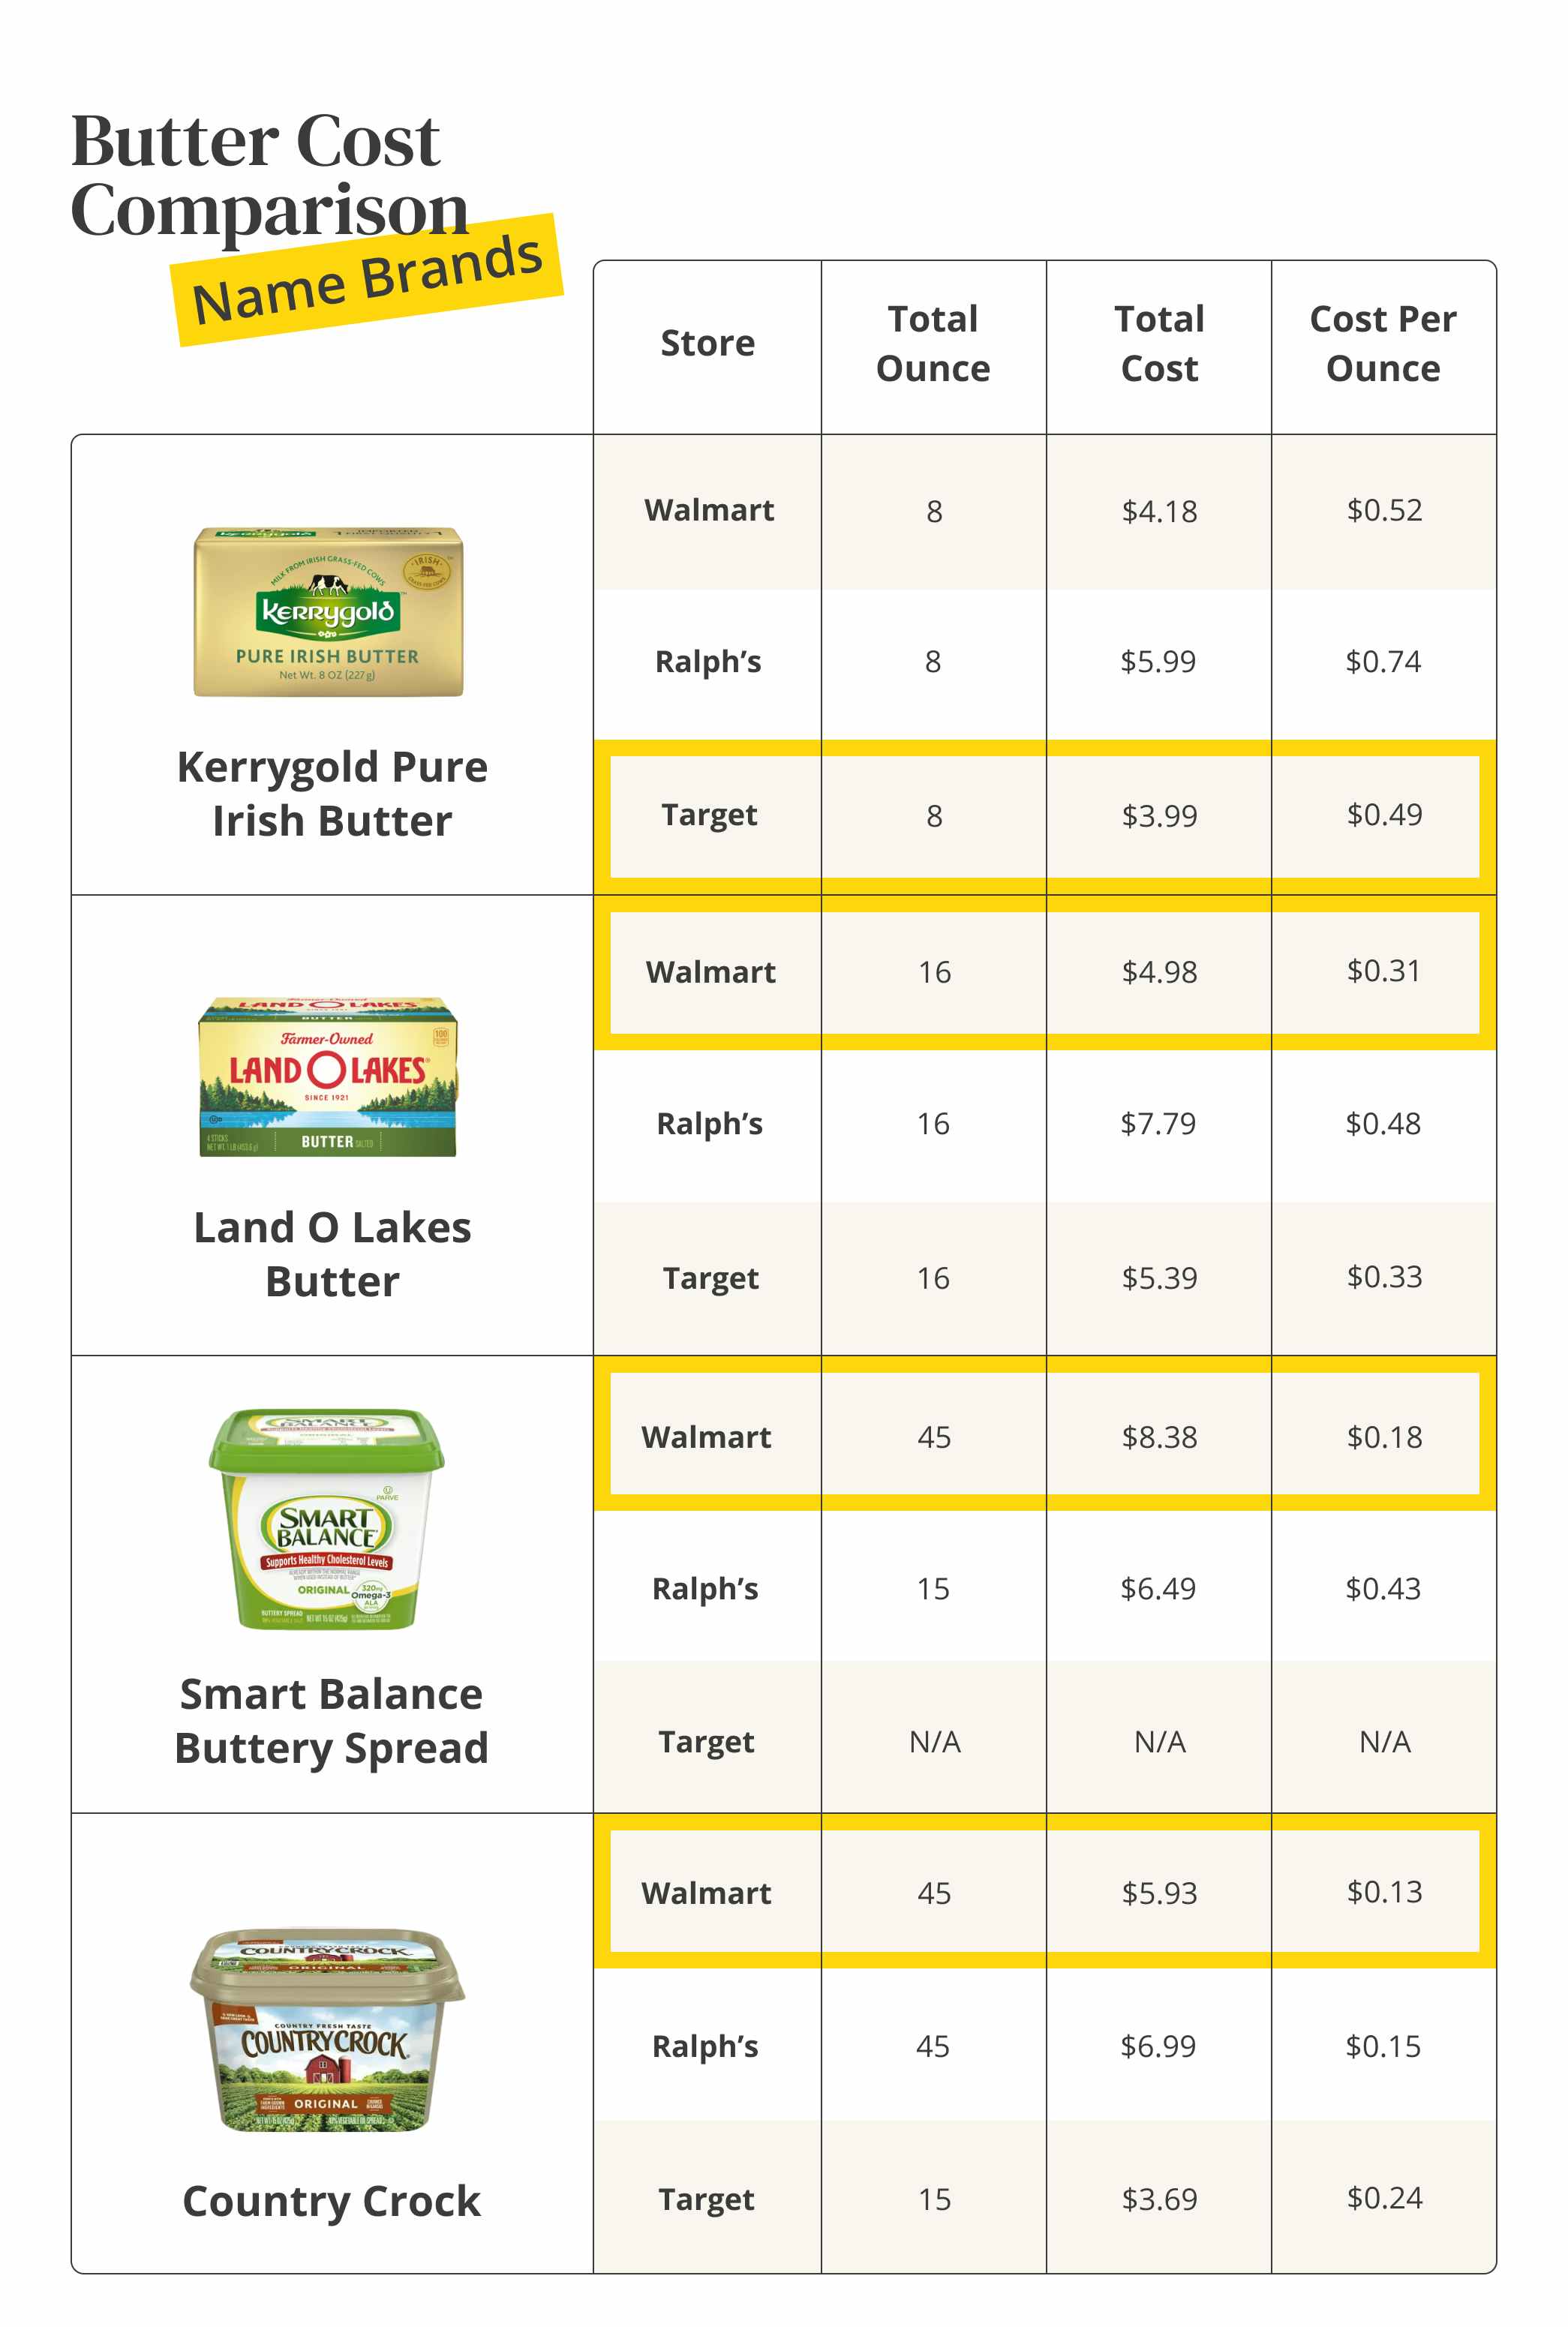 A table comparing costs of Name Brand butter